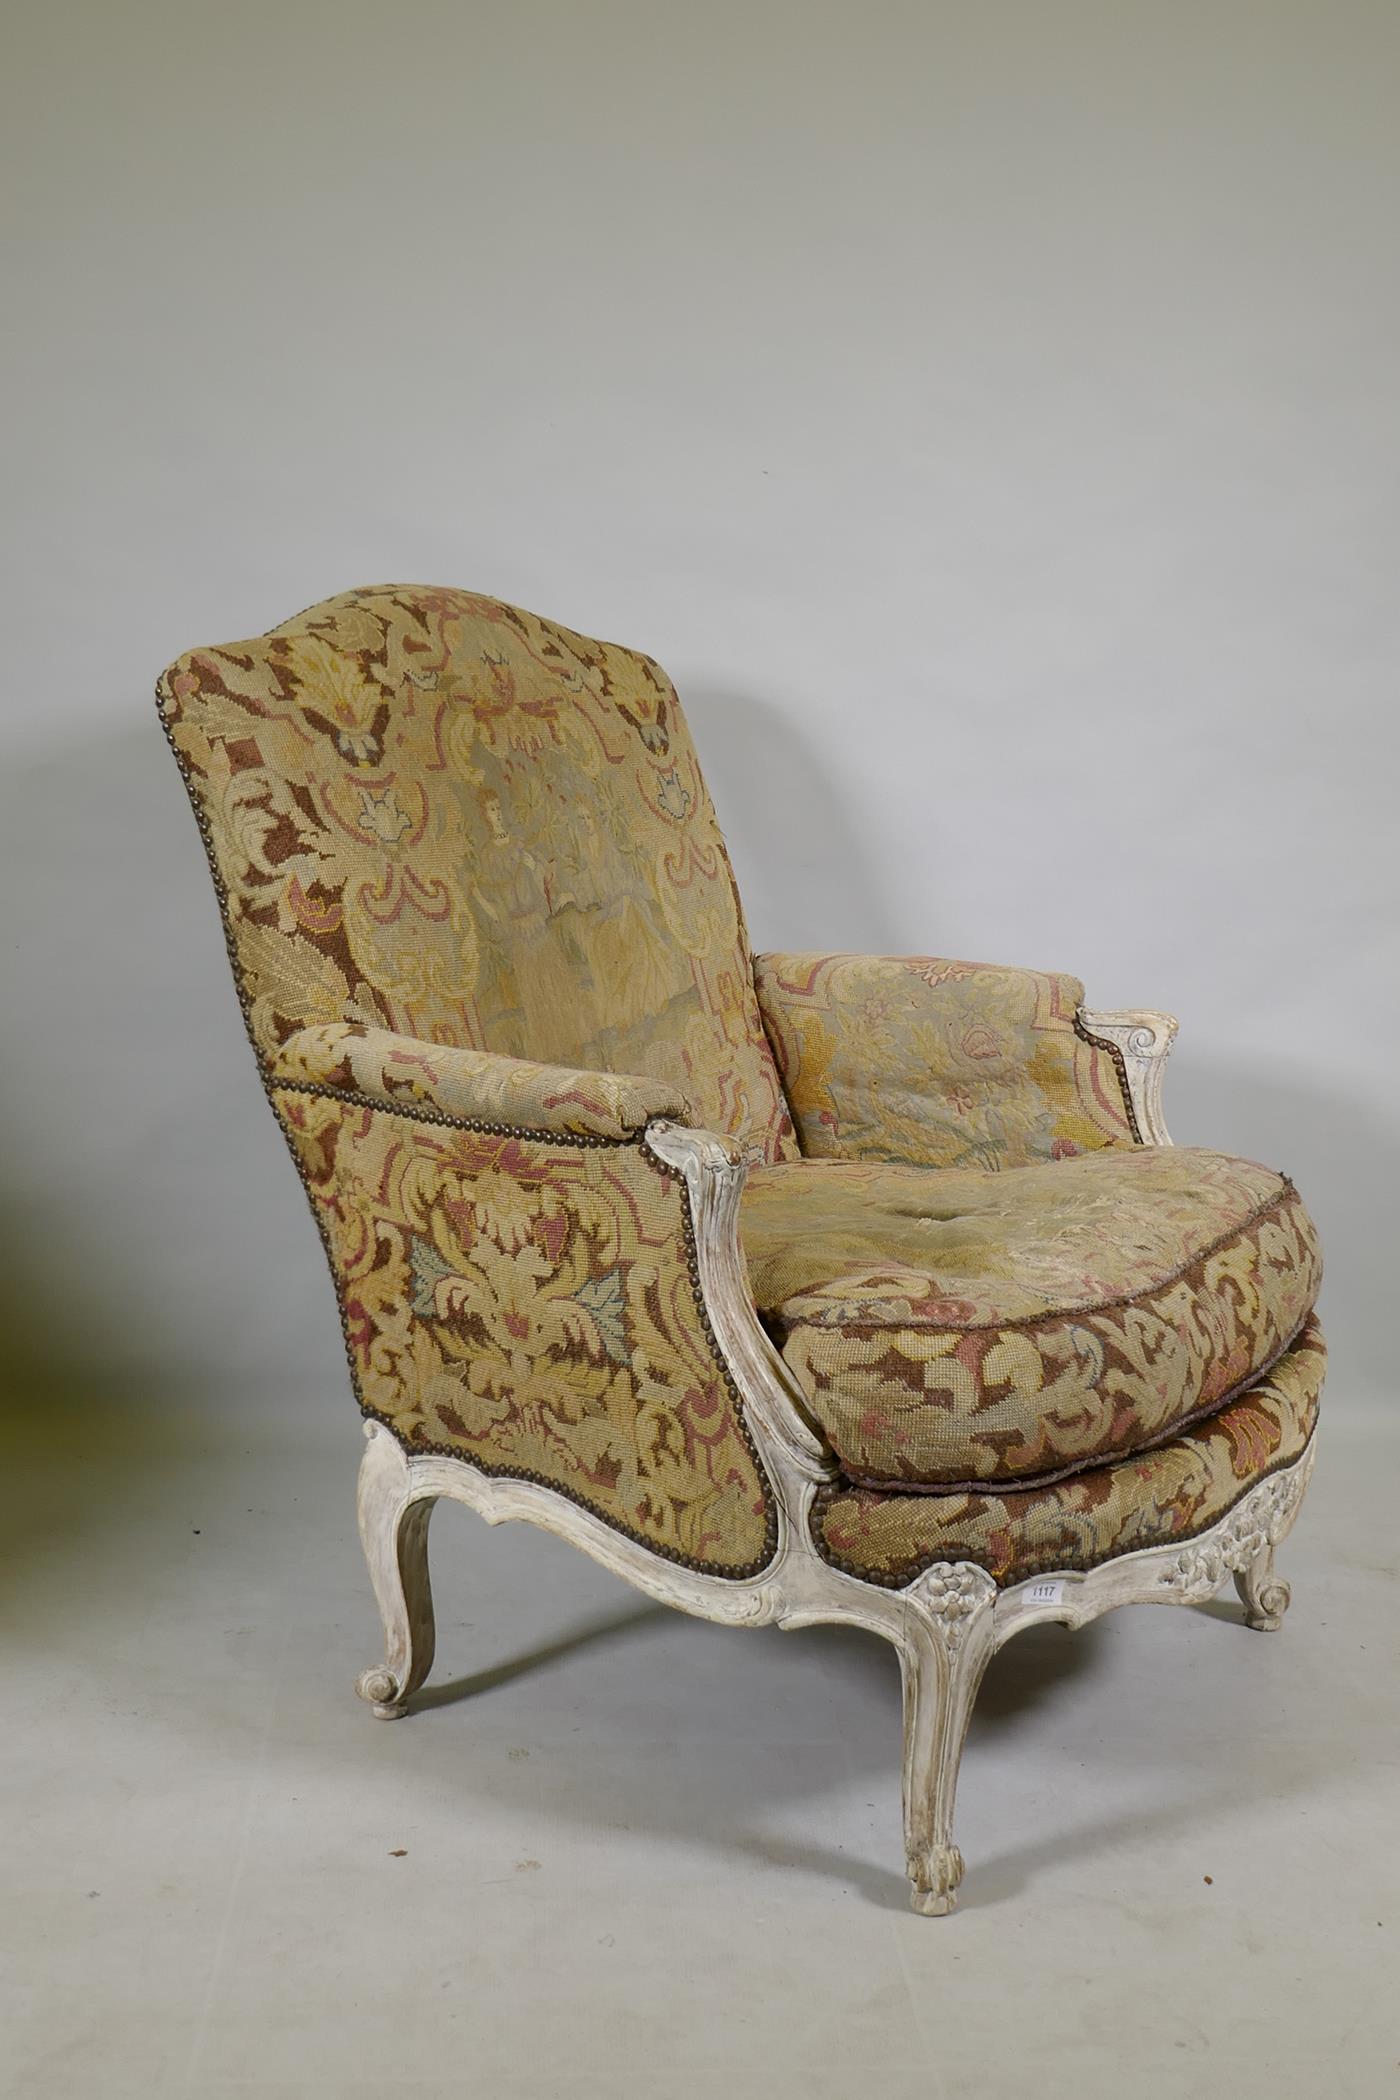 An C18th style French carved and painted beechwood framed arm chair with tapestry covers - Image 6 of 7